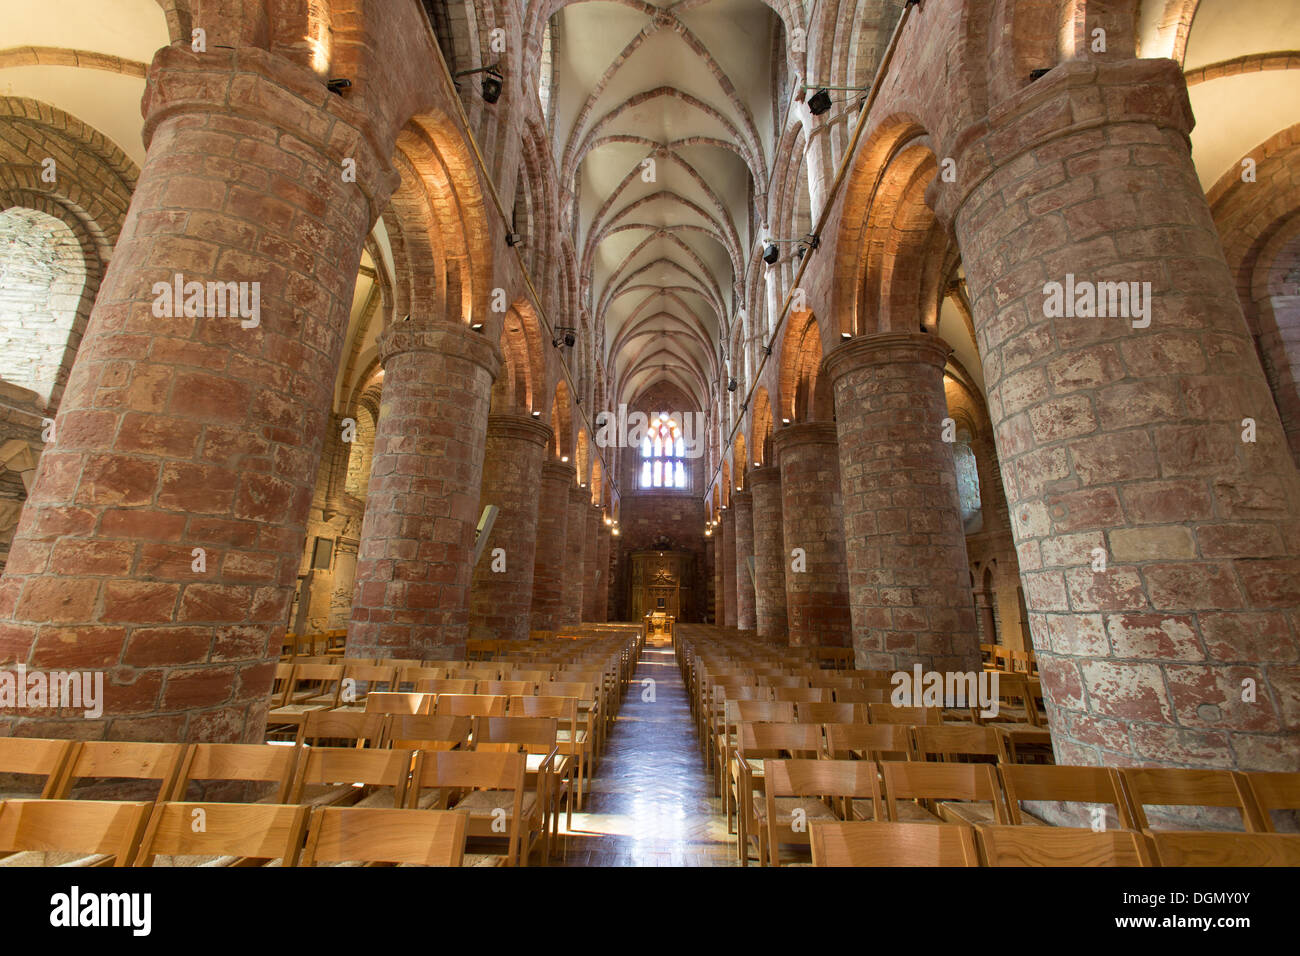 Islands of Orkney, Scotland. Picturesque internal view of St Magnus Cathedral’s nave with the west entrance in the background. Stock Photo